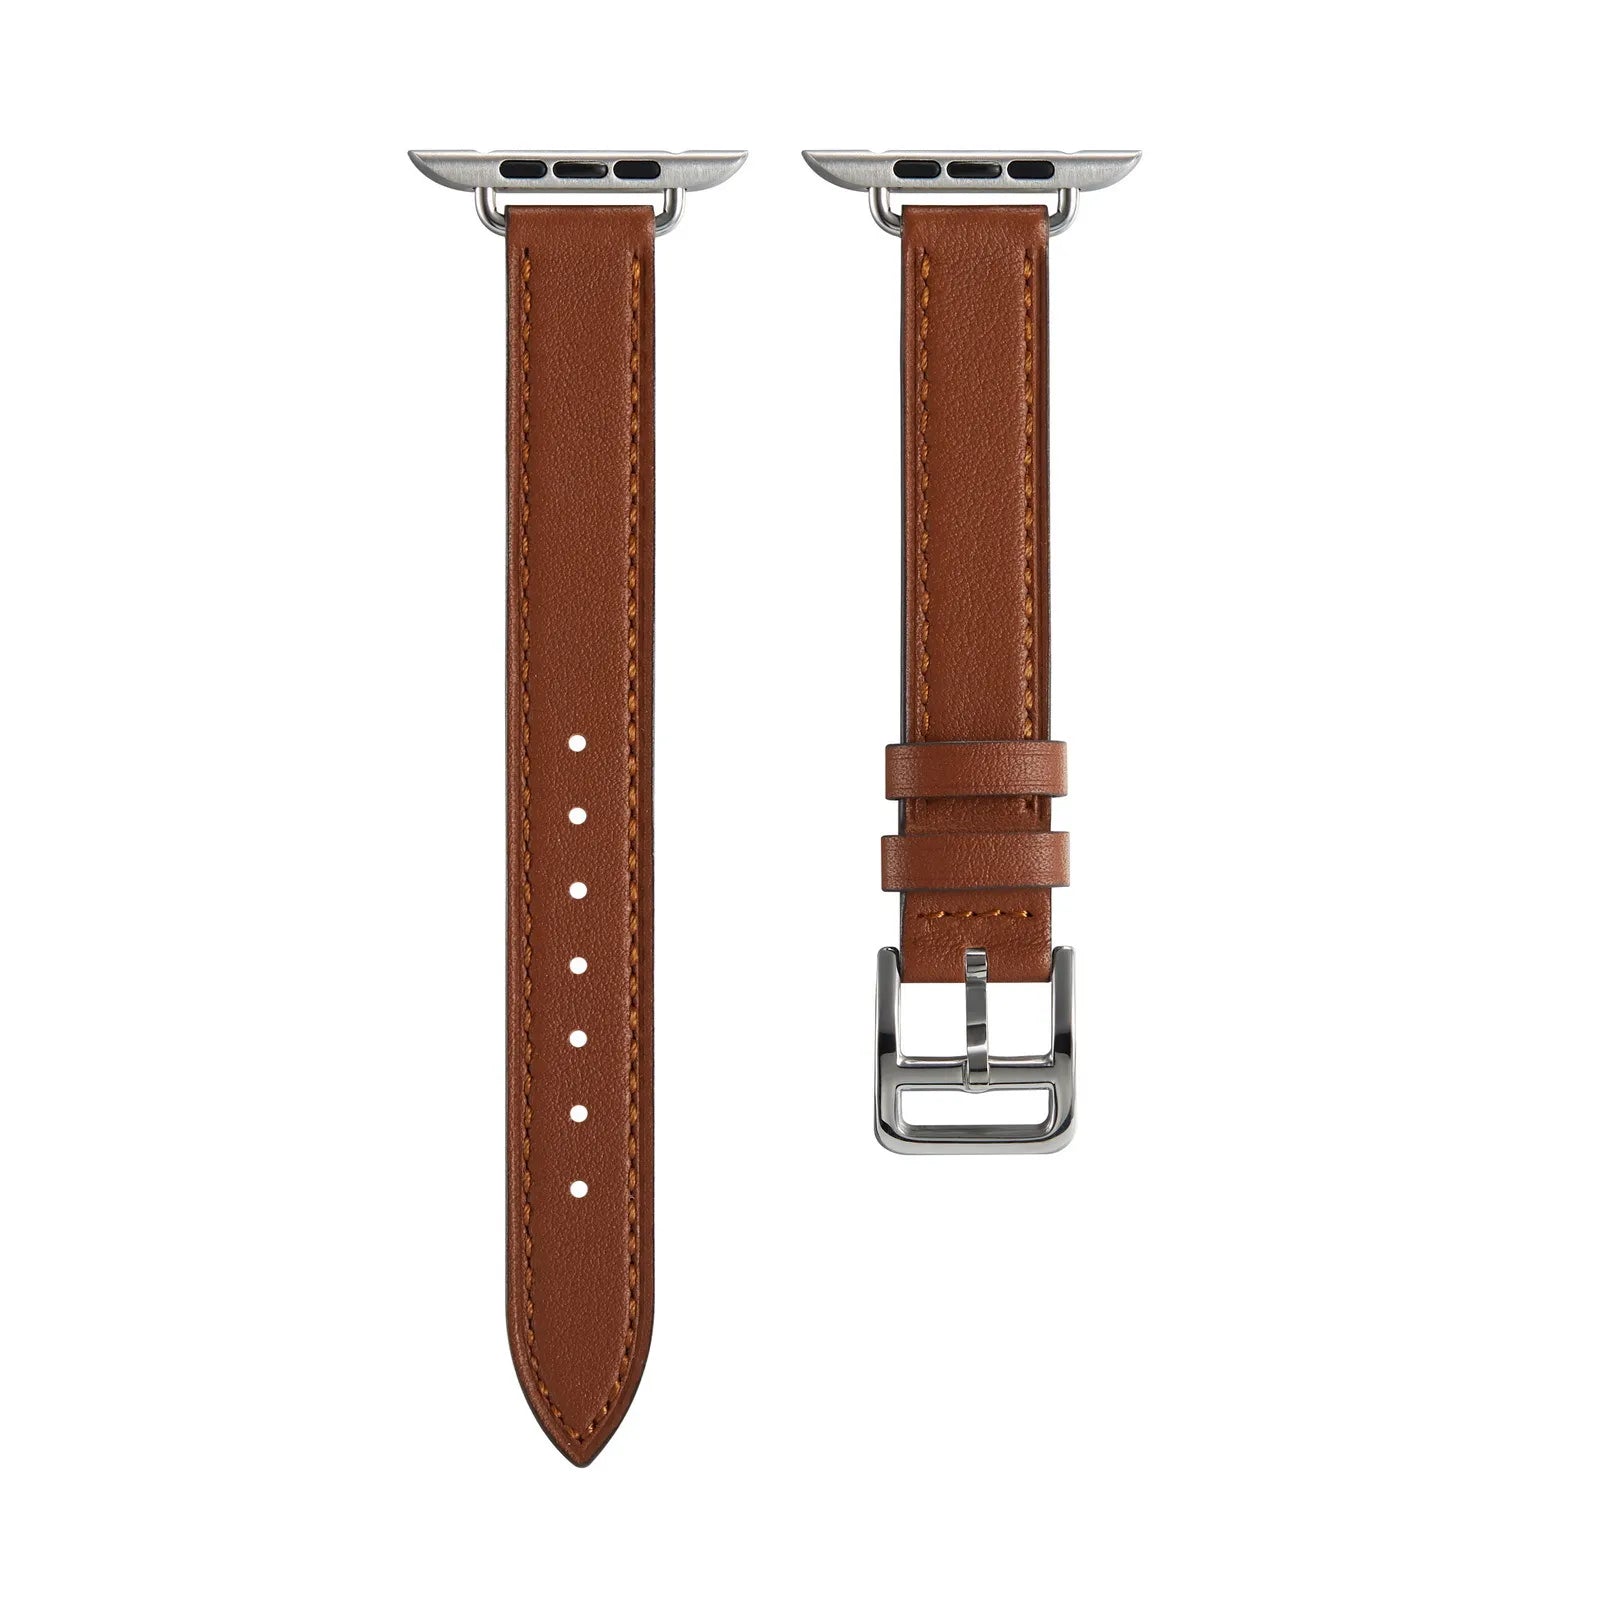 slim Apple Watch leather band#color_brown